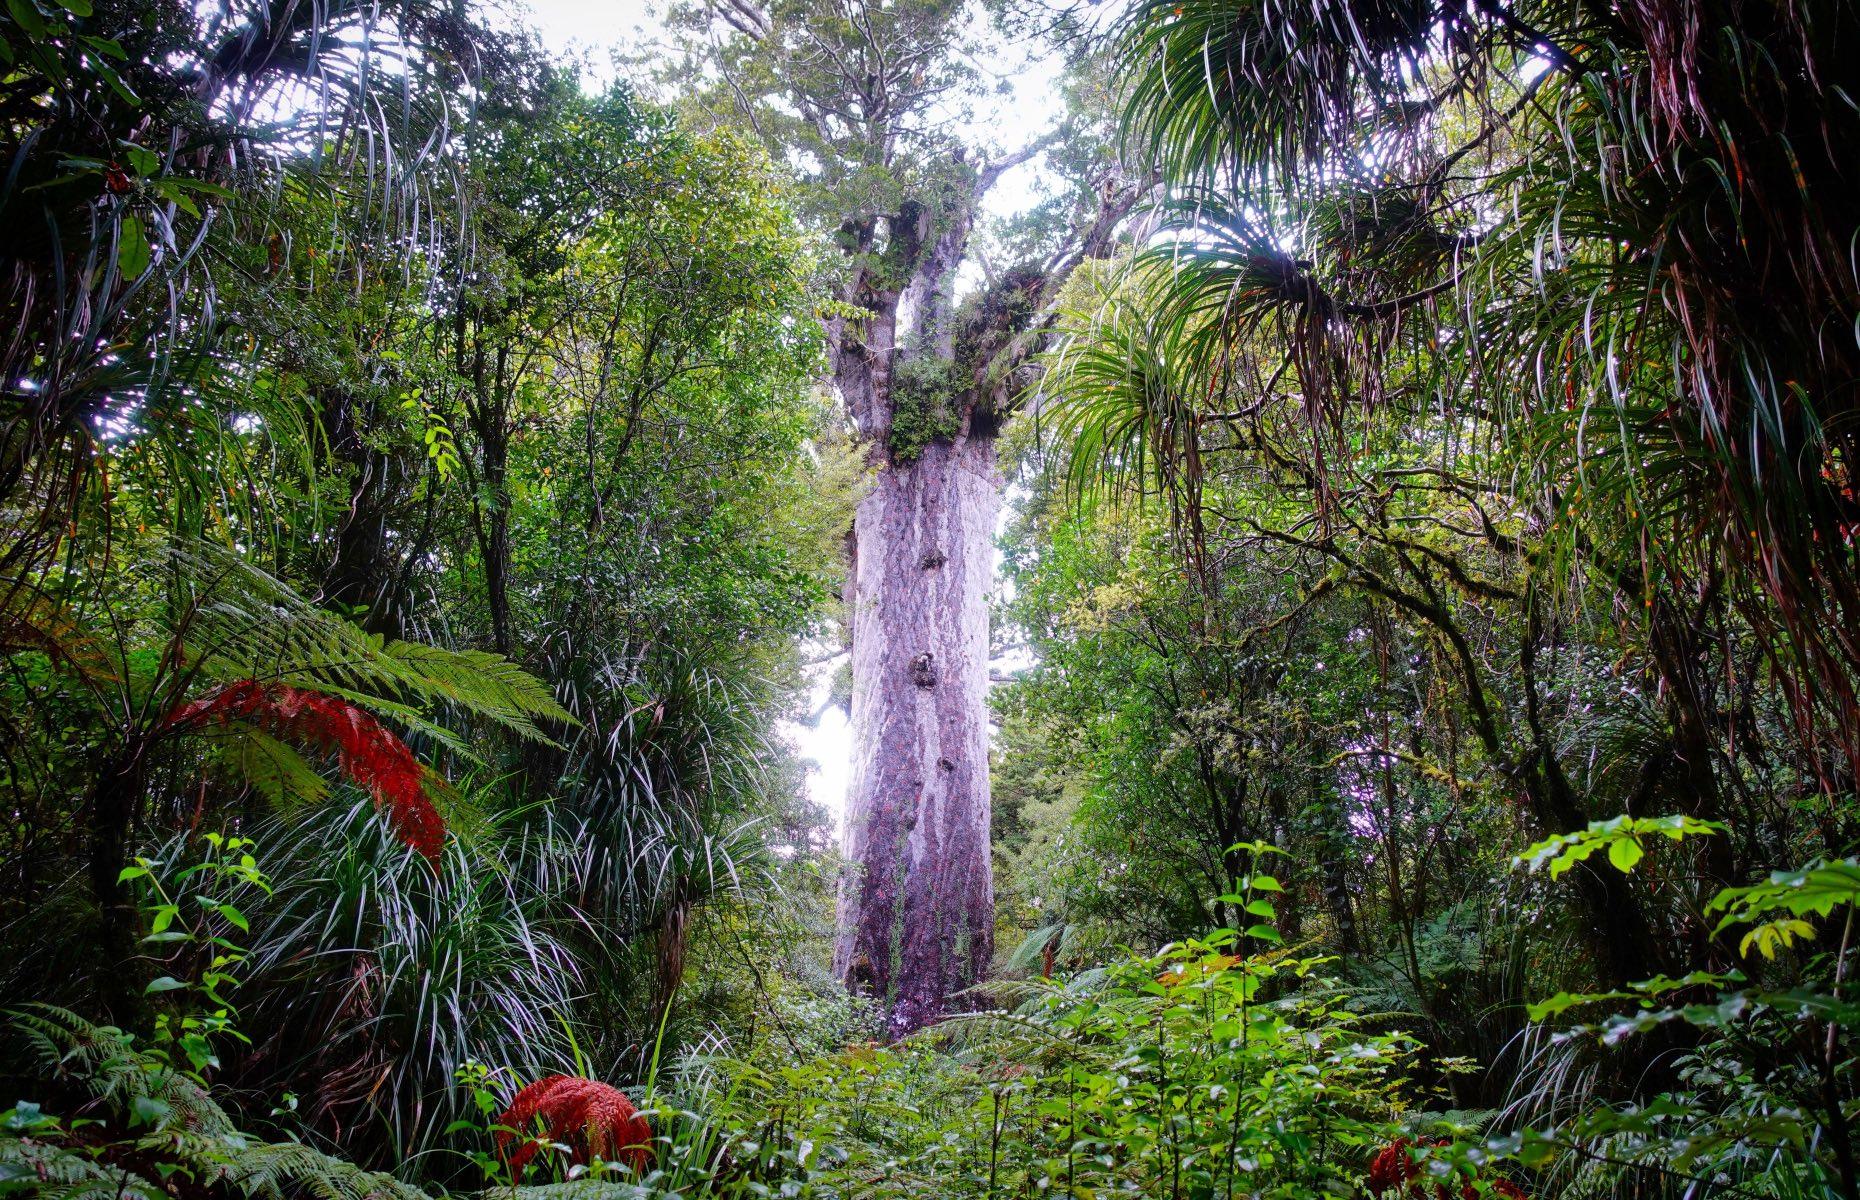 <p>This primordial world of towering ancient trees on the northern tip of New Zealand is the largest remaining tract of native forest in Northland. It's home to Tane Mahuta – the Lord of the Forest – a 2,000-year-old sacred kauri tree that measures 14 feet around its trunk and almost 59 feet up to its first branch. That's young compared to another giant kauri tree found here: Te Matua Ngahere, meaning Father of the Forest, is estimated to be between 2,500 and 3,000 years old.</p>